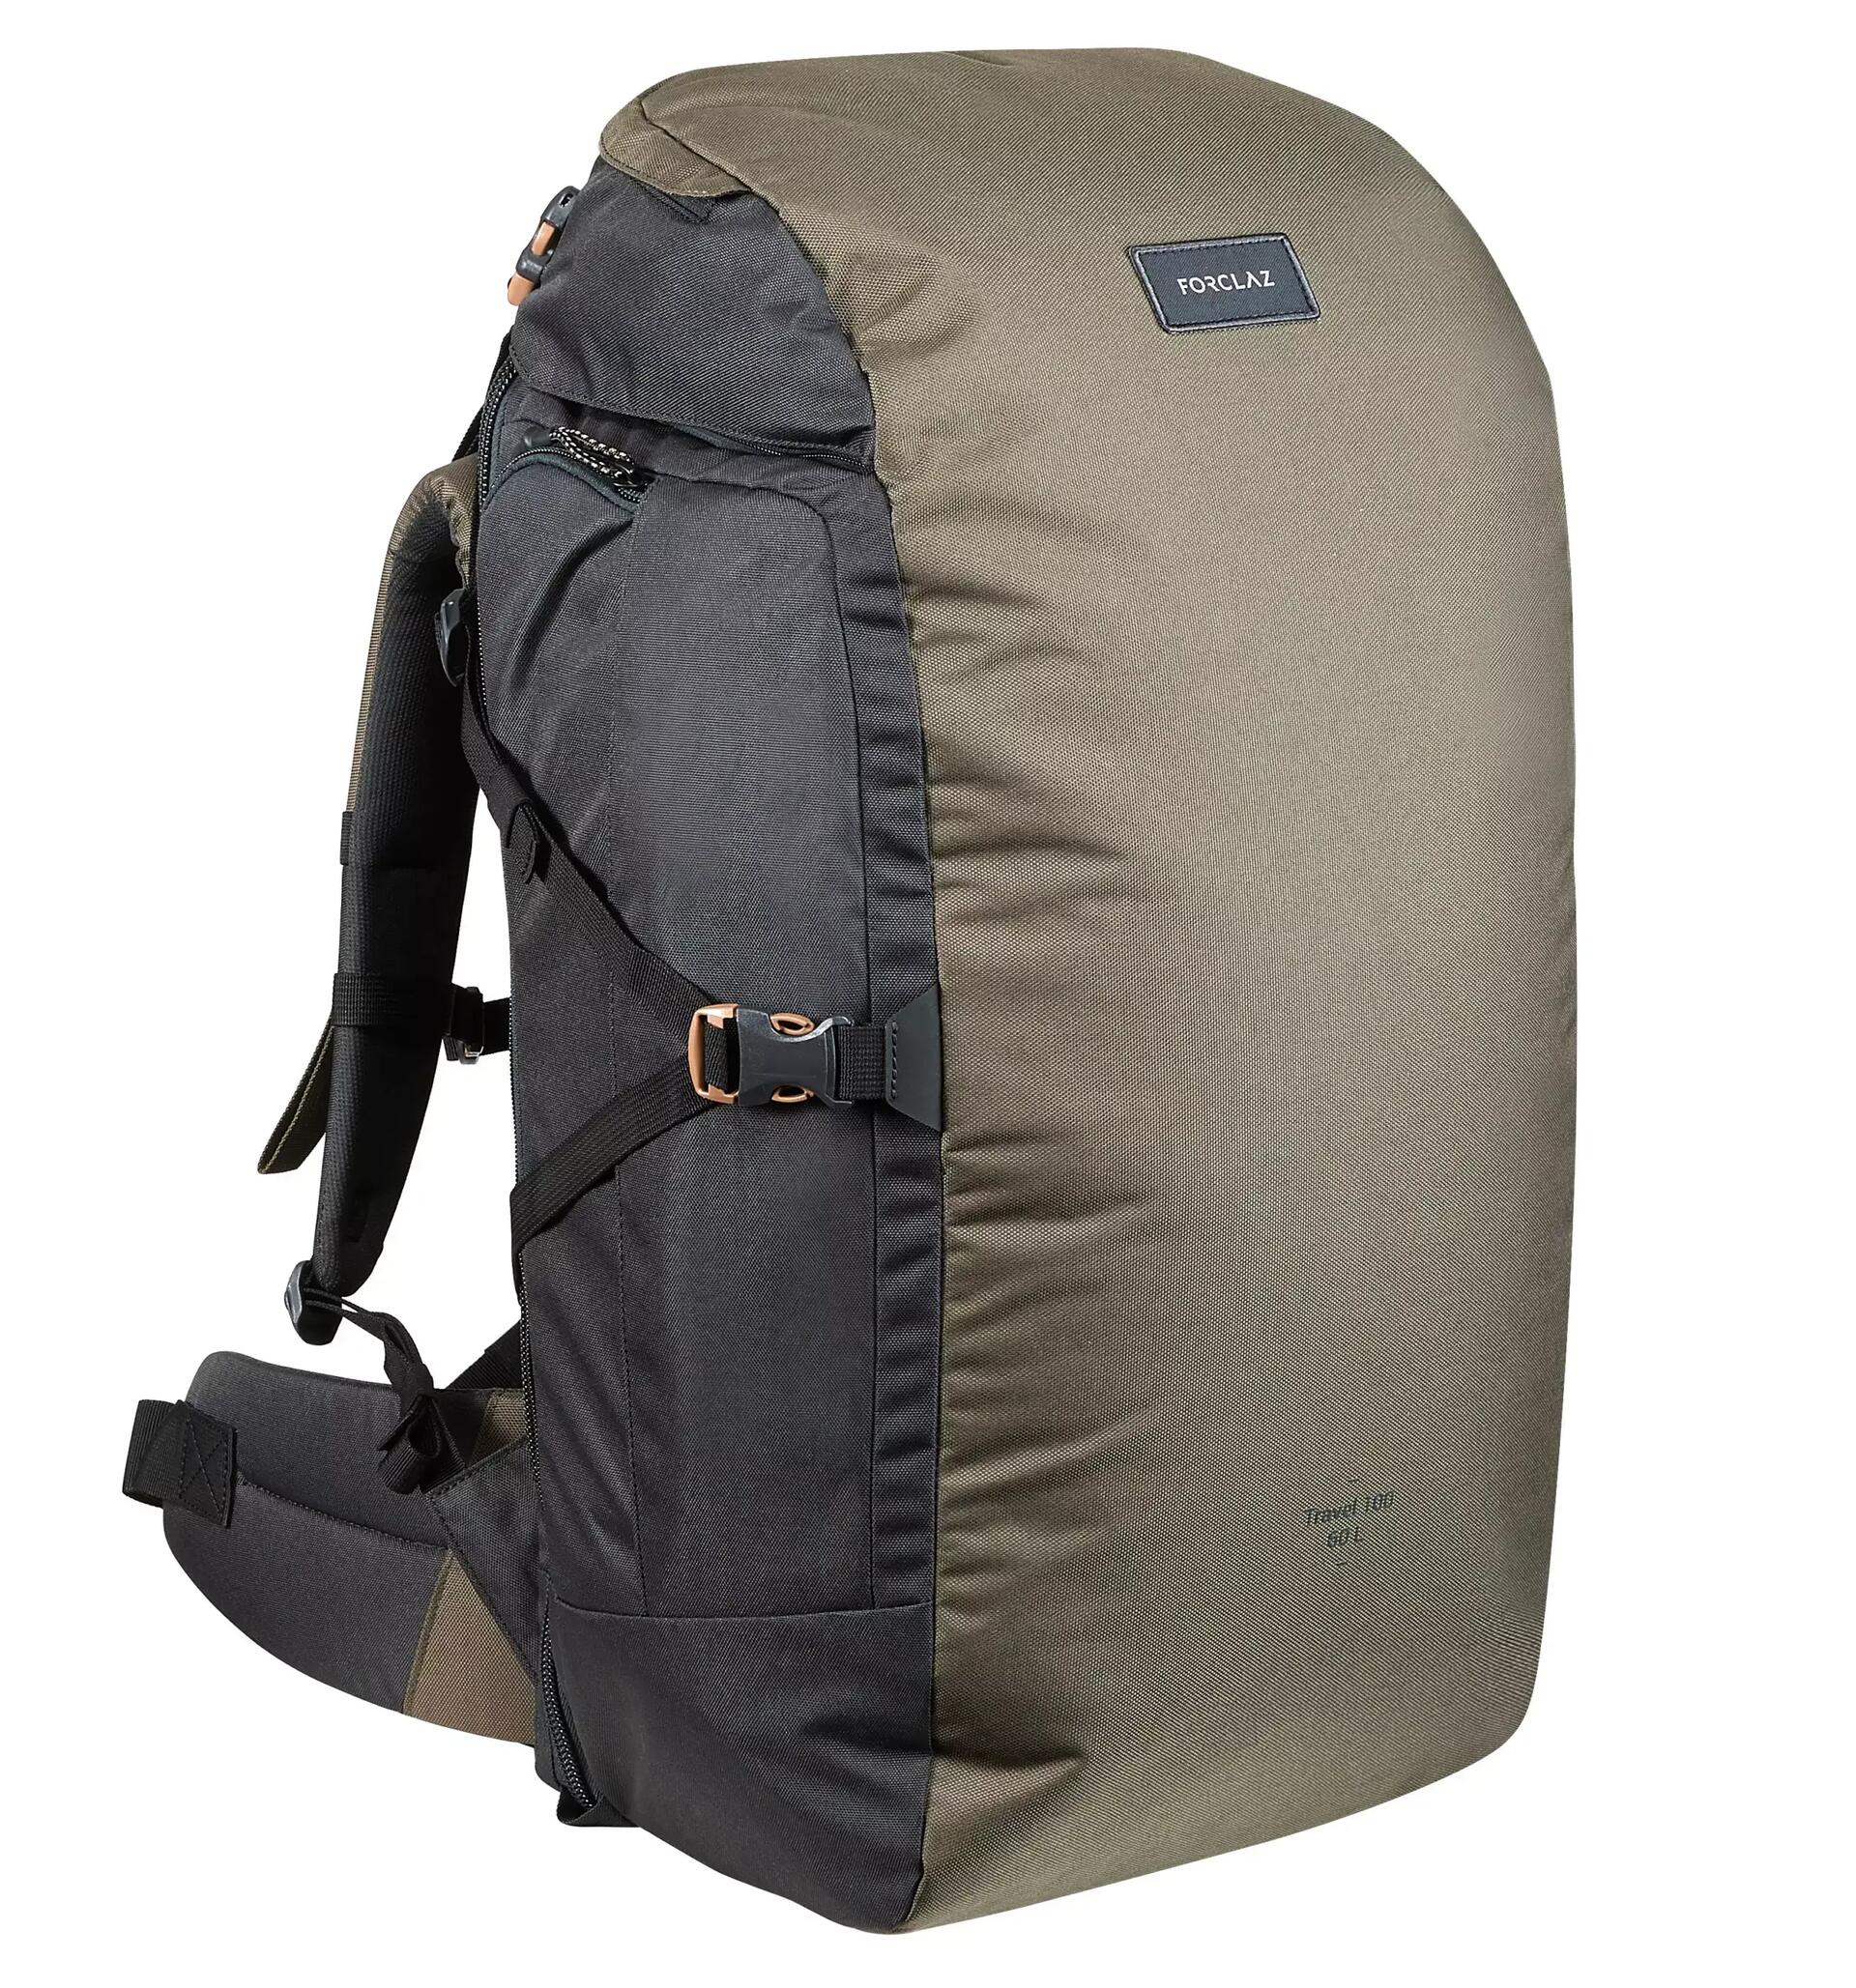 Trekking and Travel Backpack 60 L - Travel 100